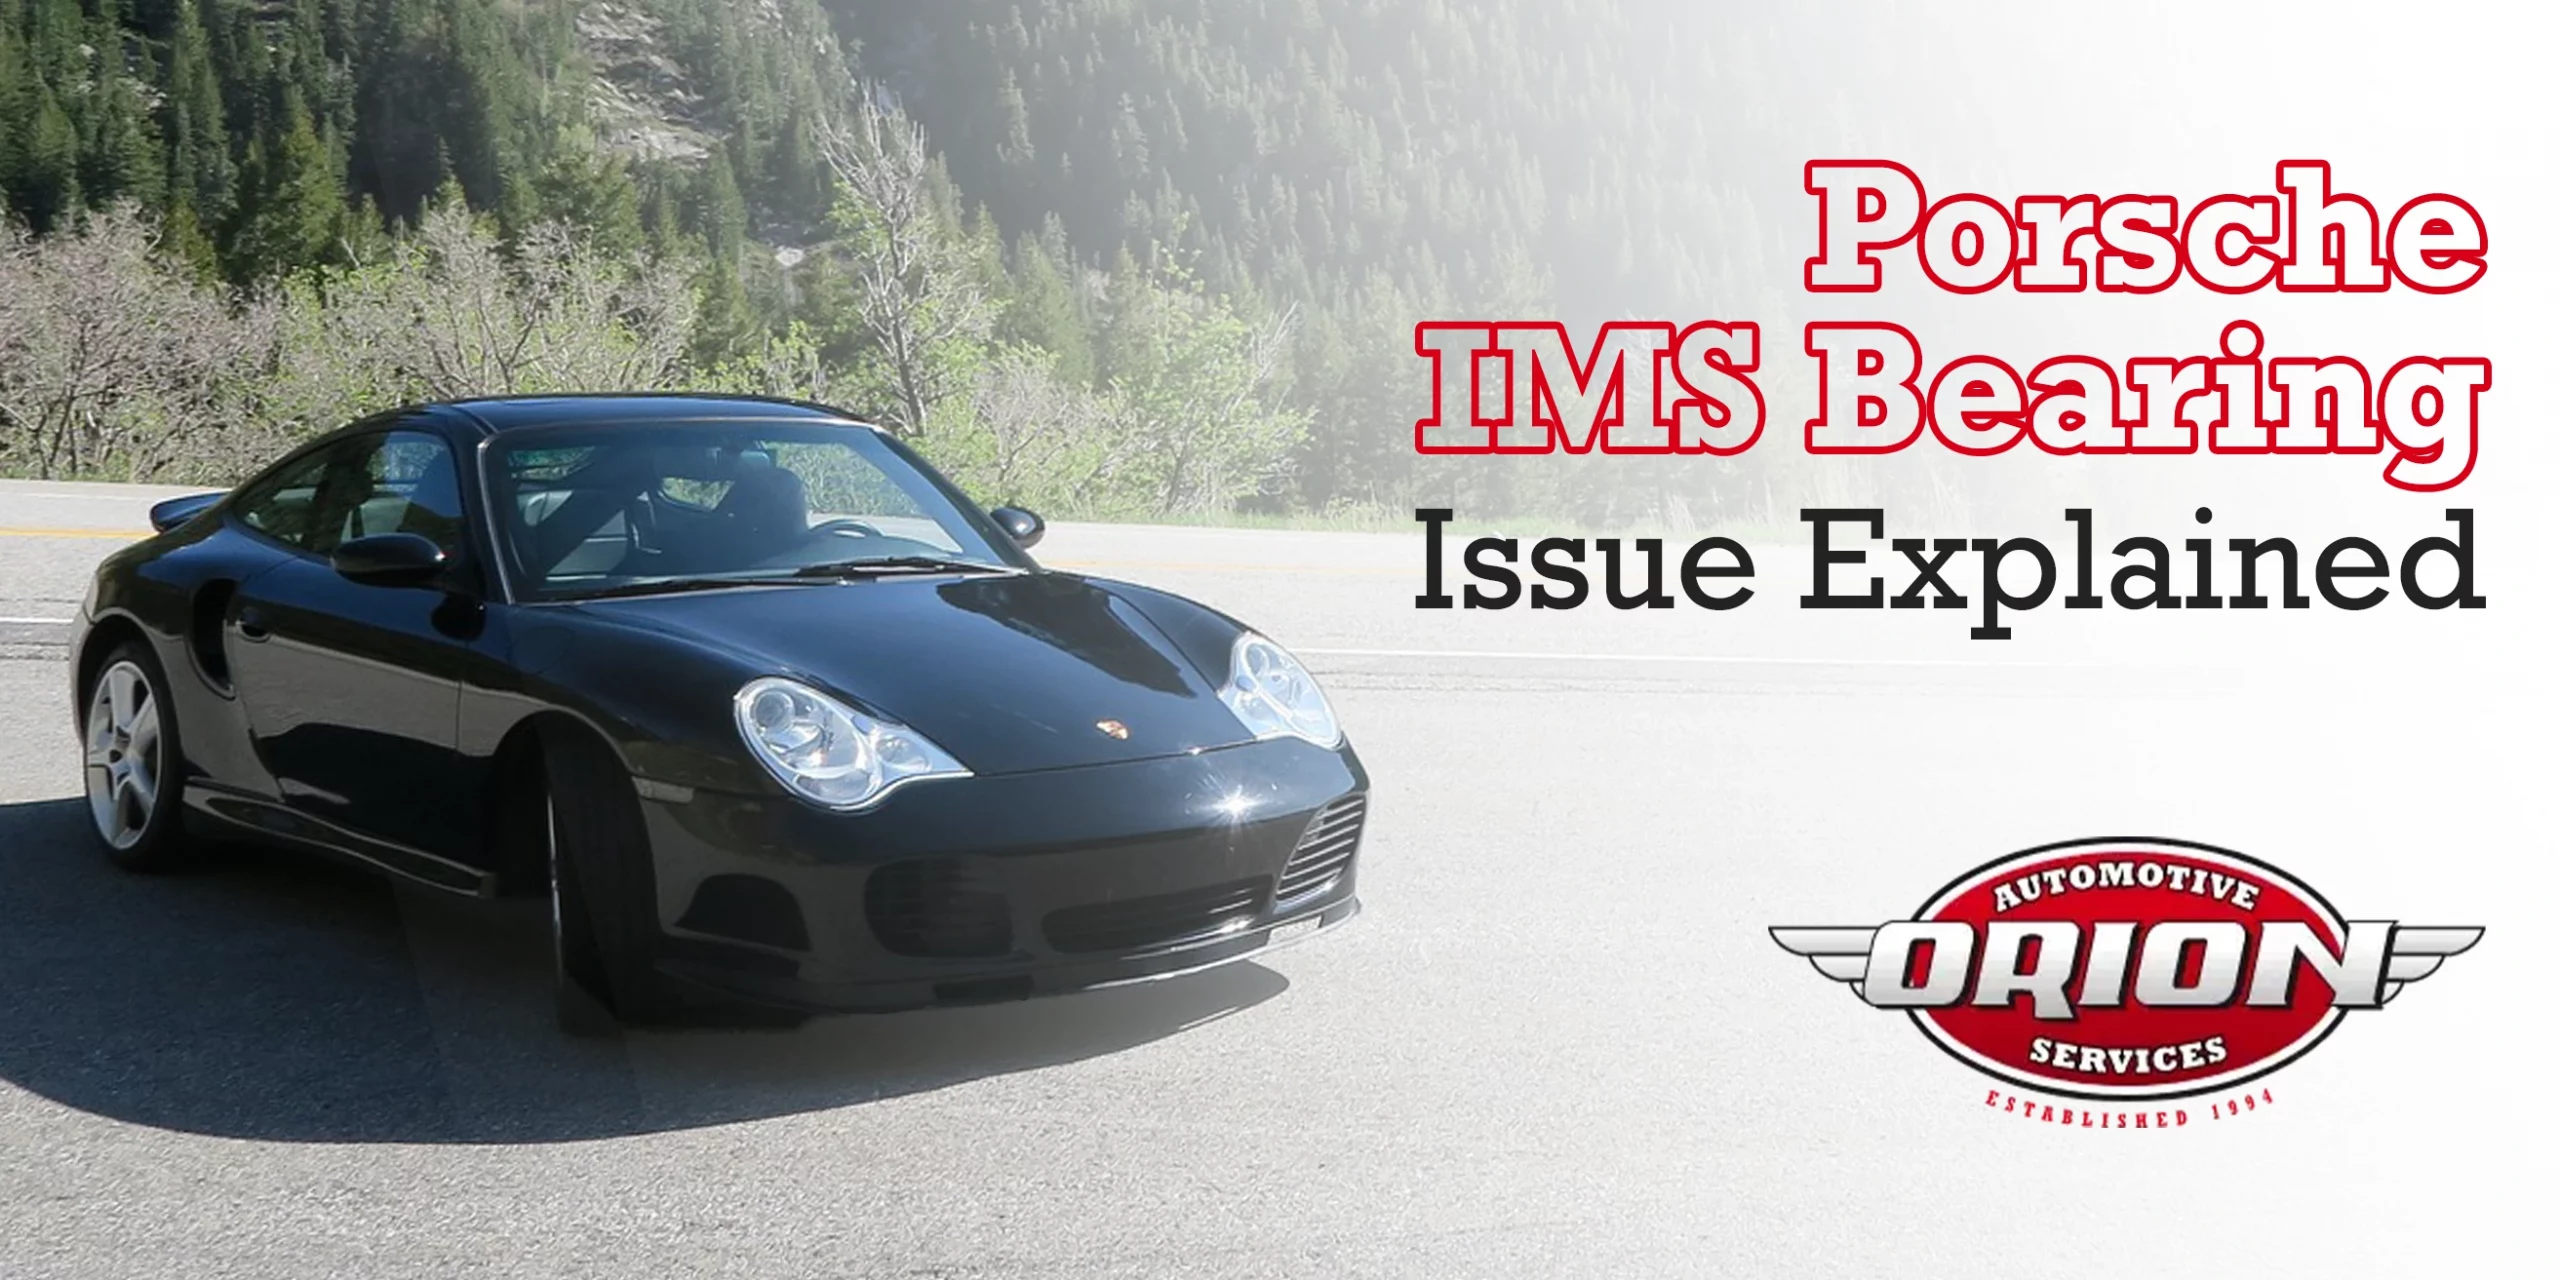 Porsche IMS Bearing Issue Explained